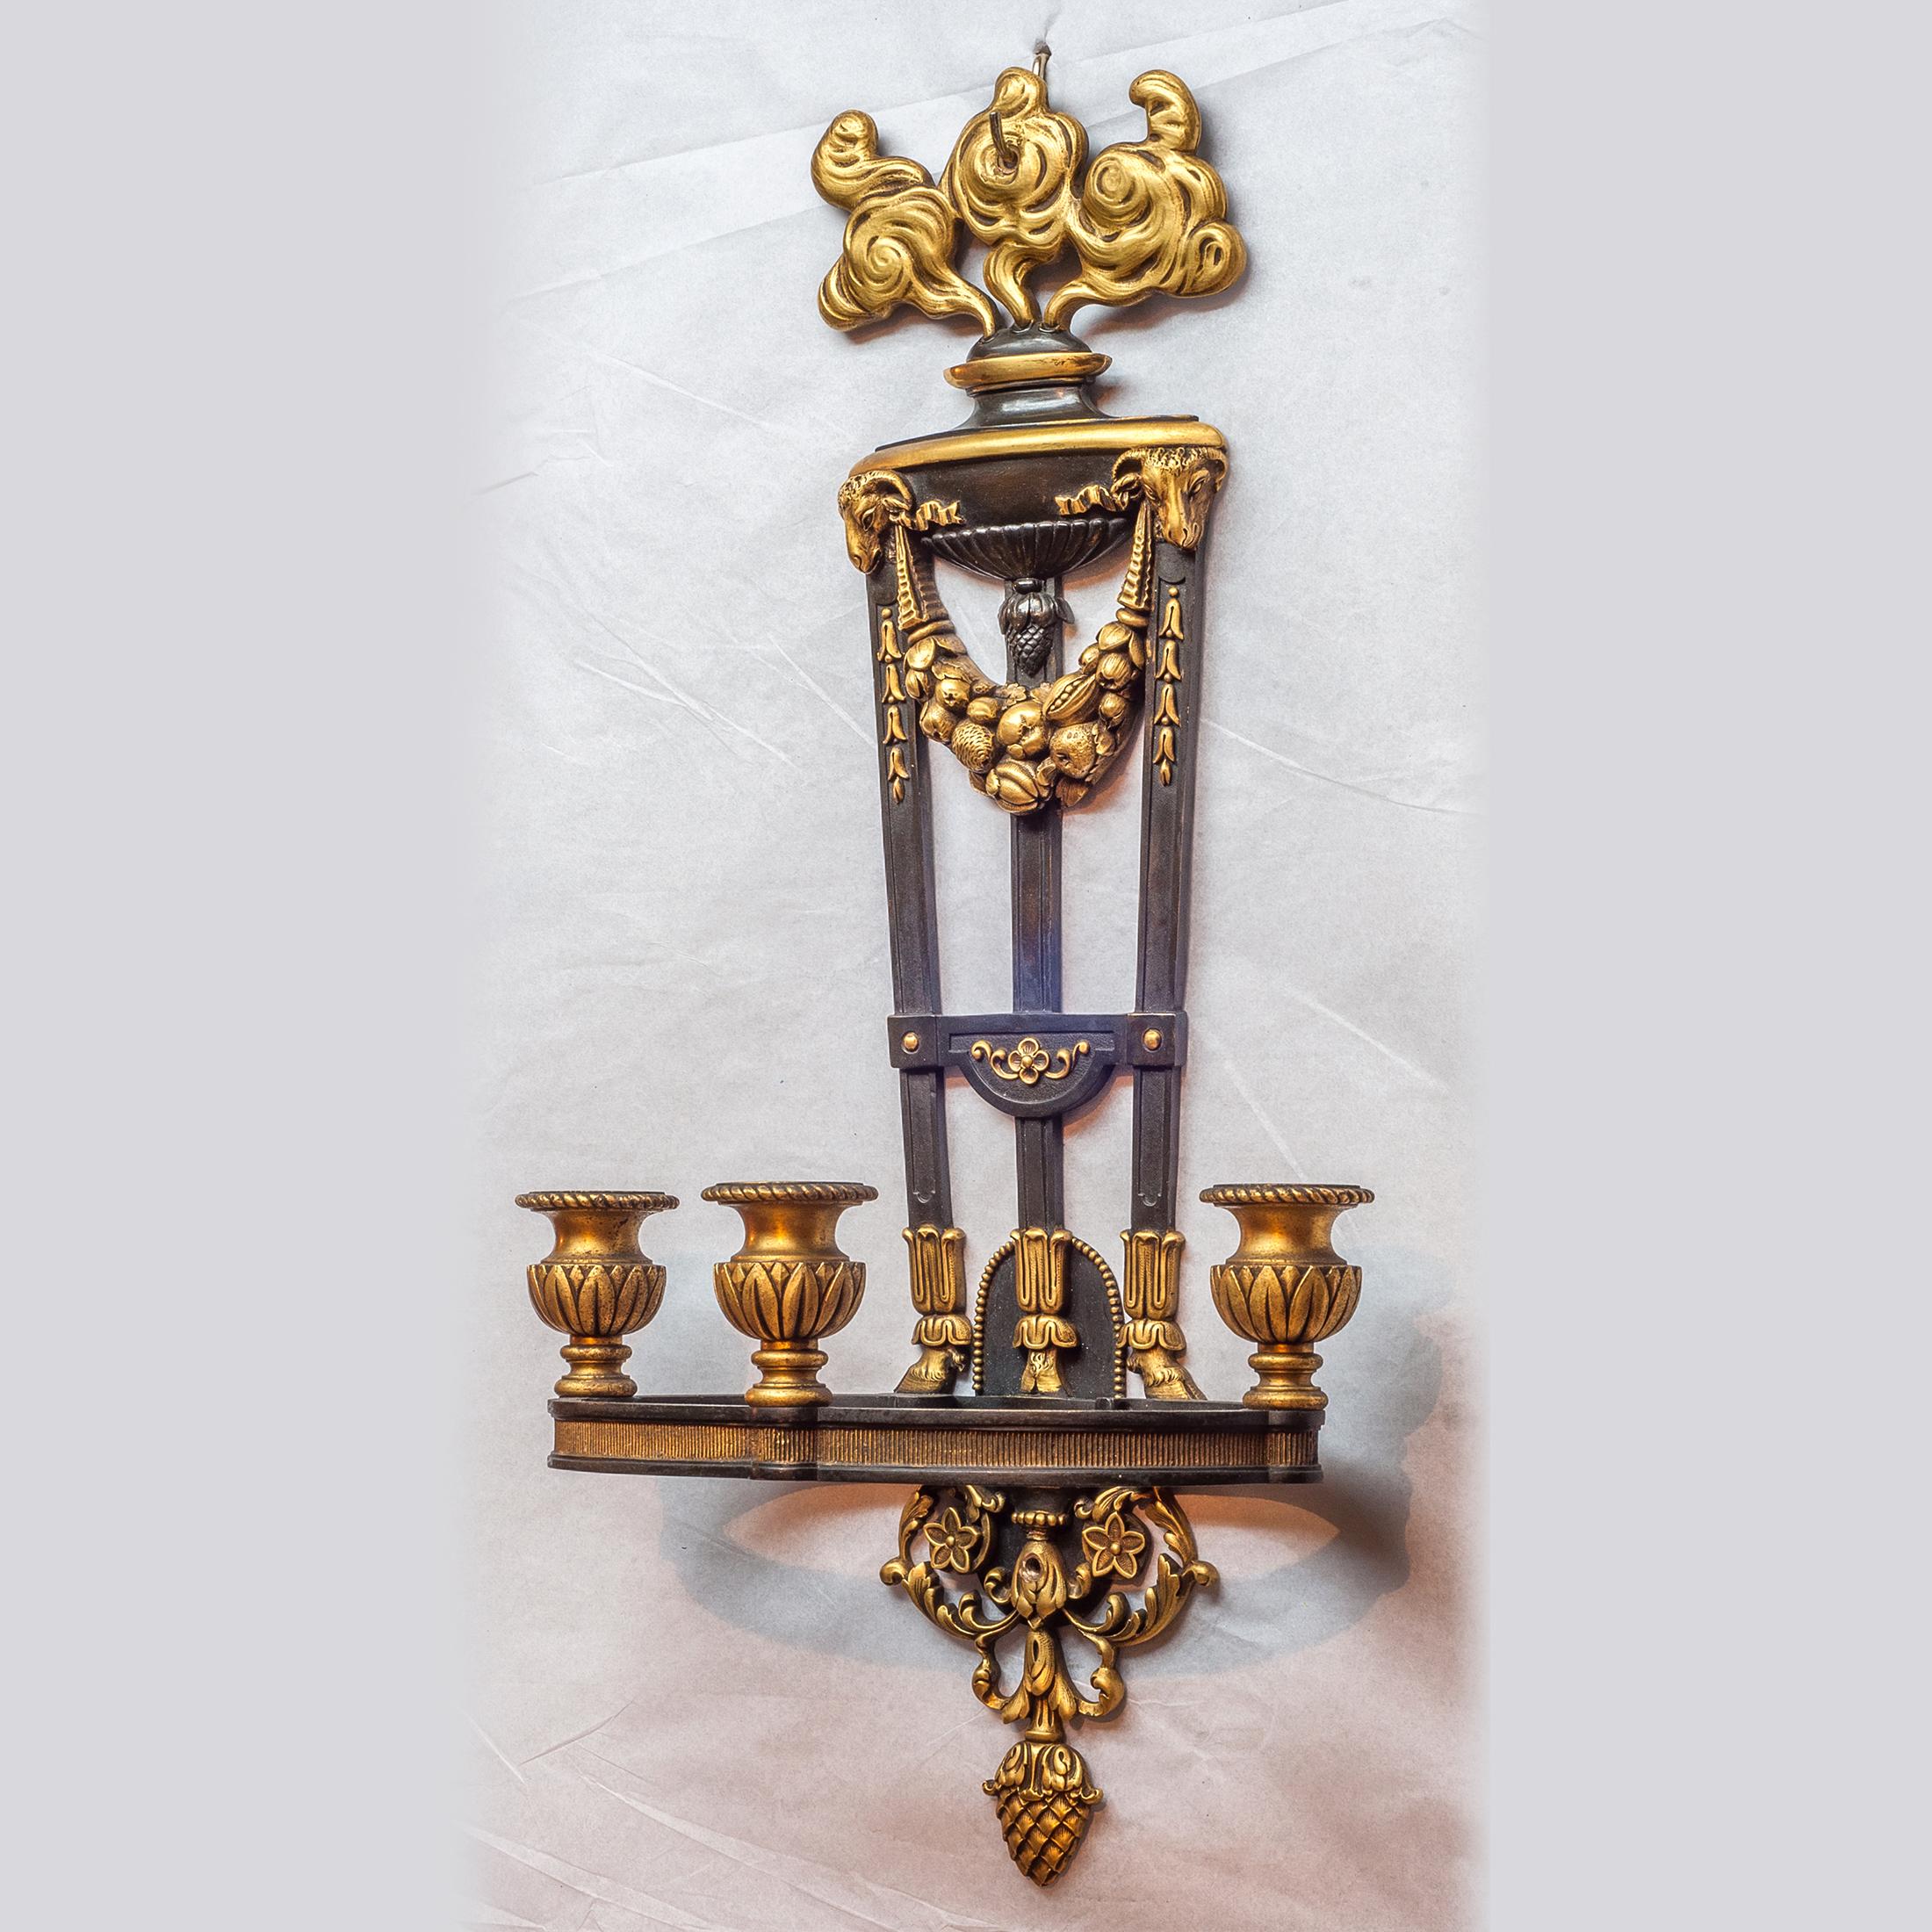 Fine pair of French Ormolu three-light wall sconces with rams head.

Origin: French
Date: 19th century
Dimension: 21 1/2 x 11 1/4 x 6 1/2 inches.